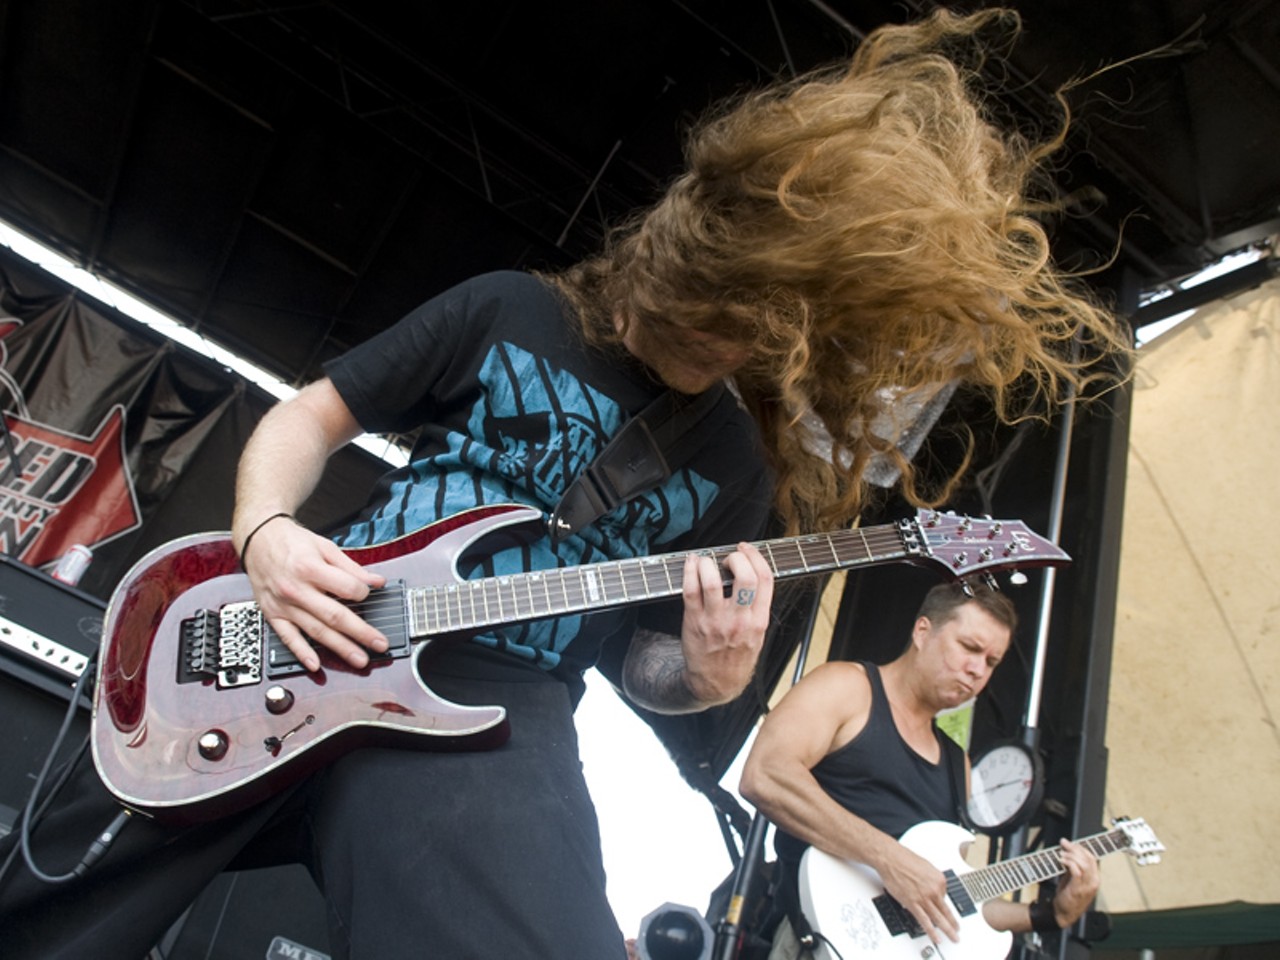 Andrew W.K.'s band performing at the 2010 Vans Warped Tour in St. Louis.